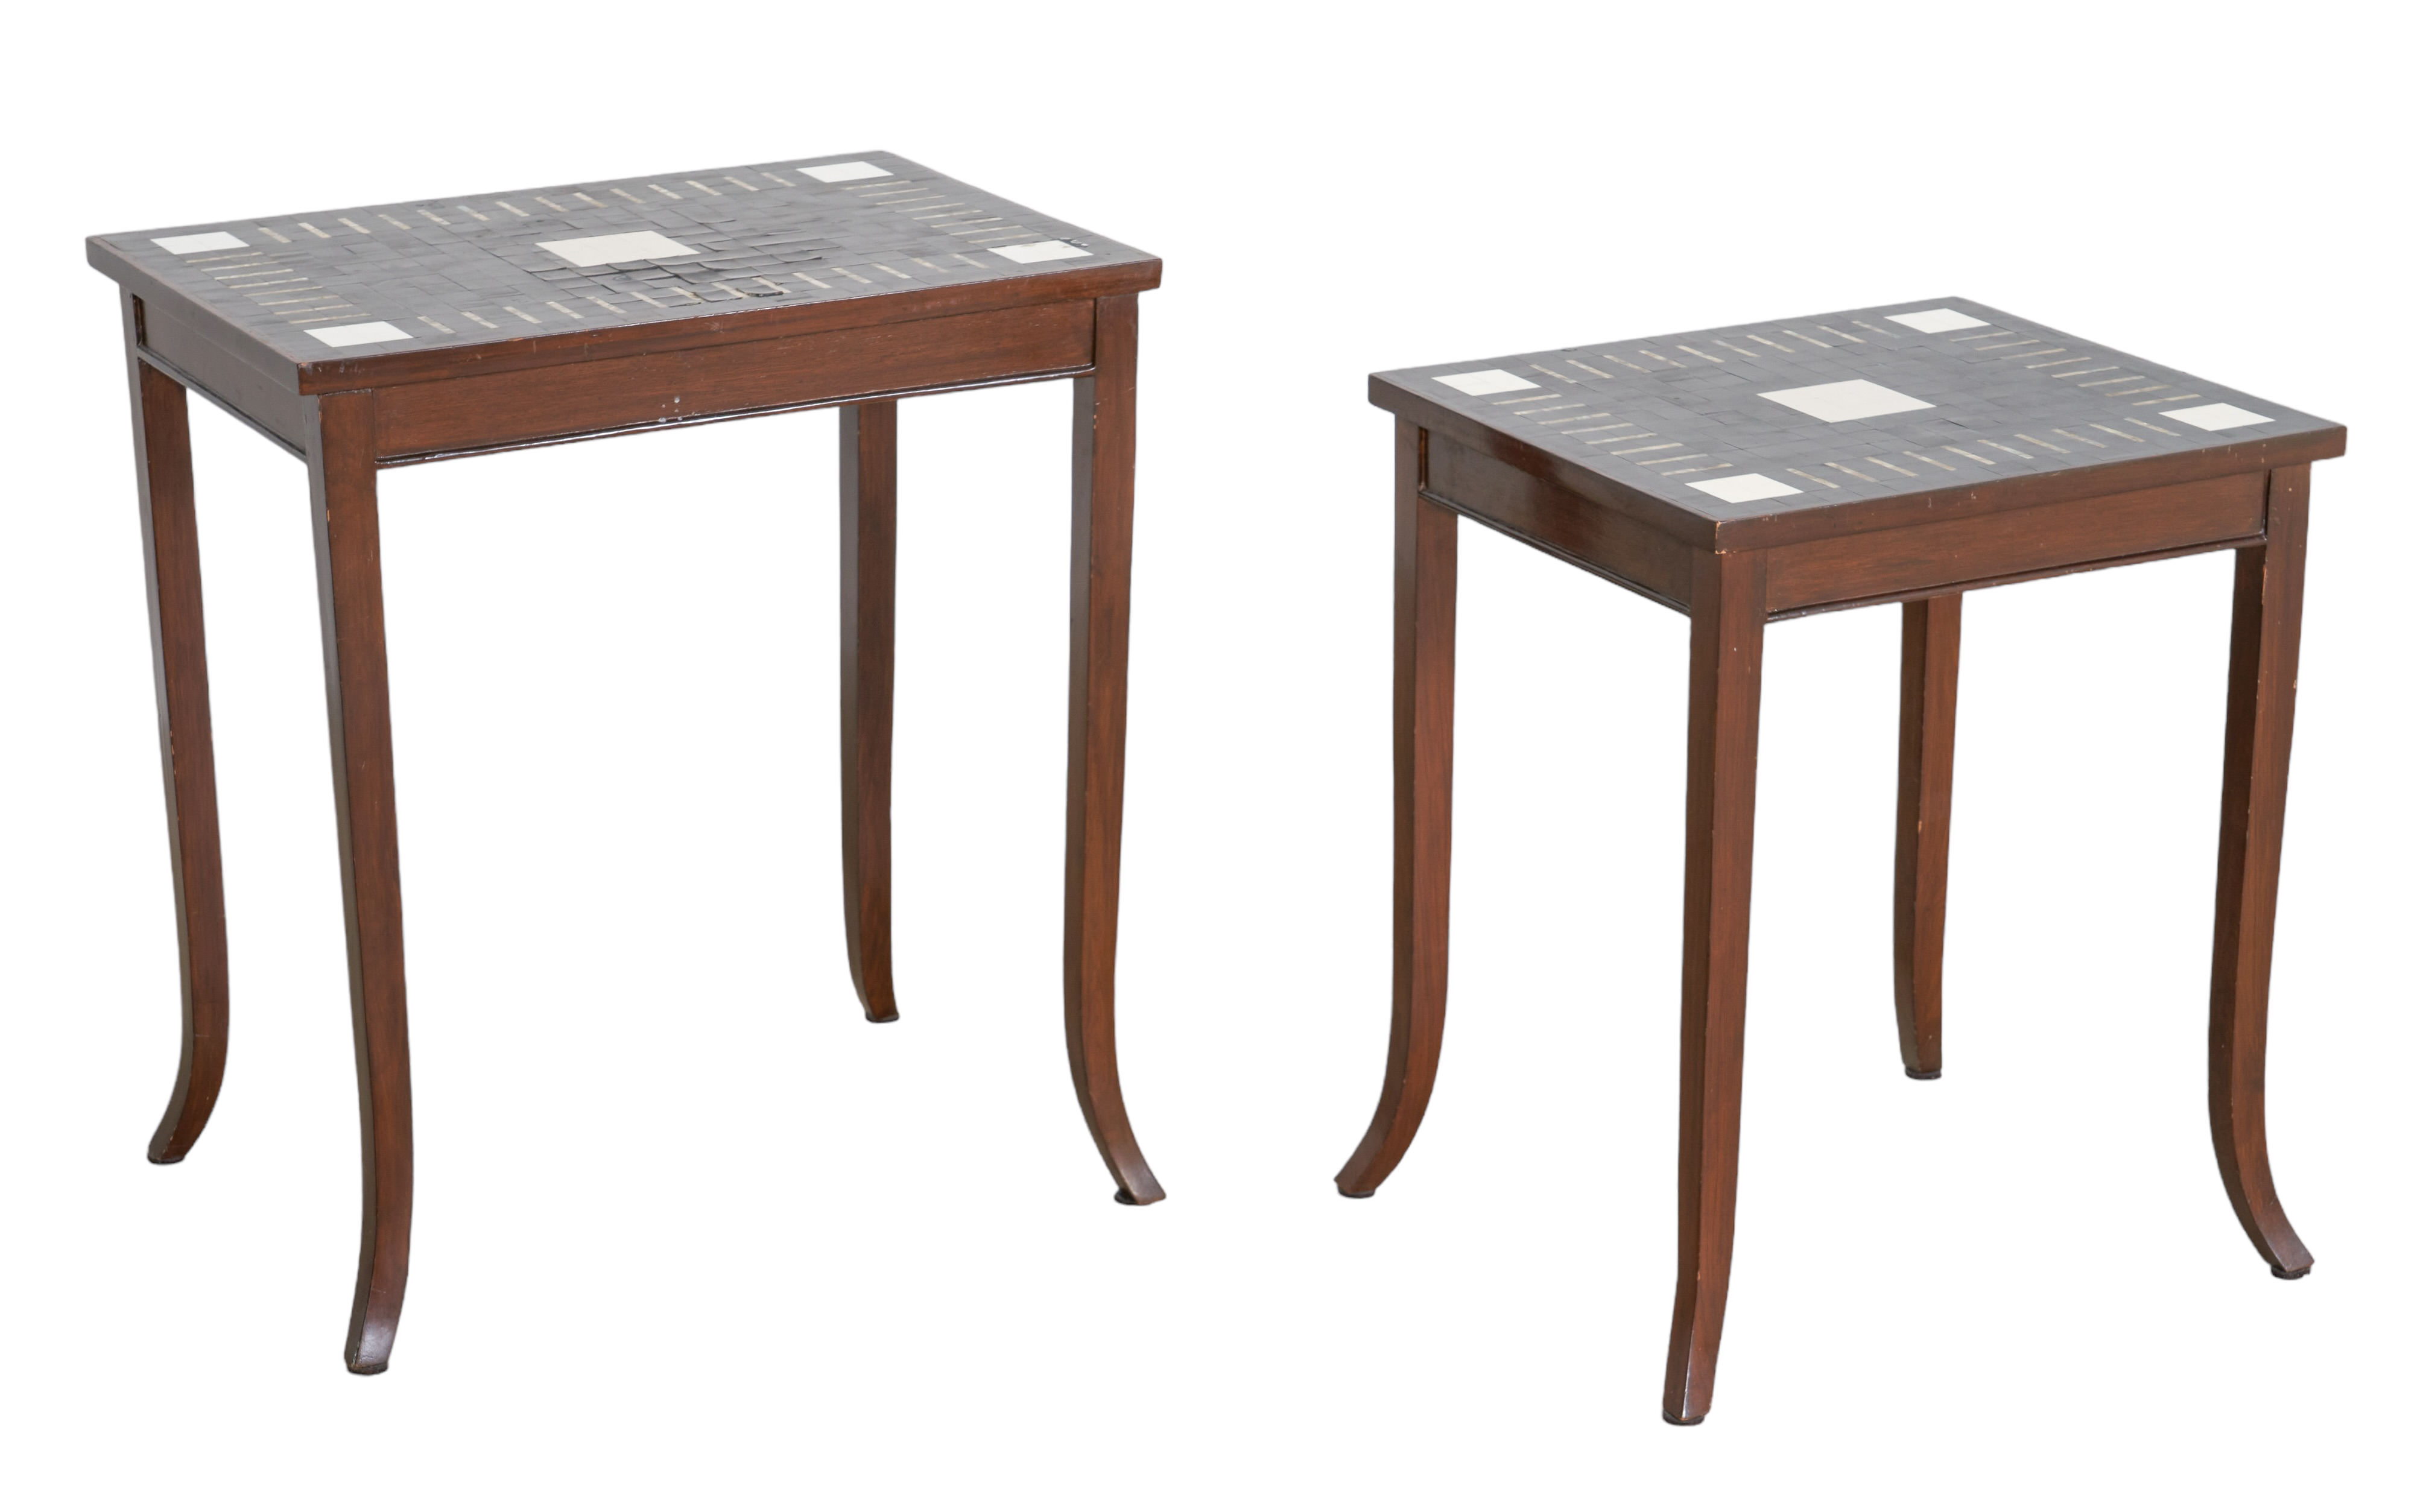  2 Contemporary side tables tile 3b1090